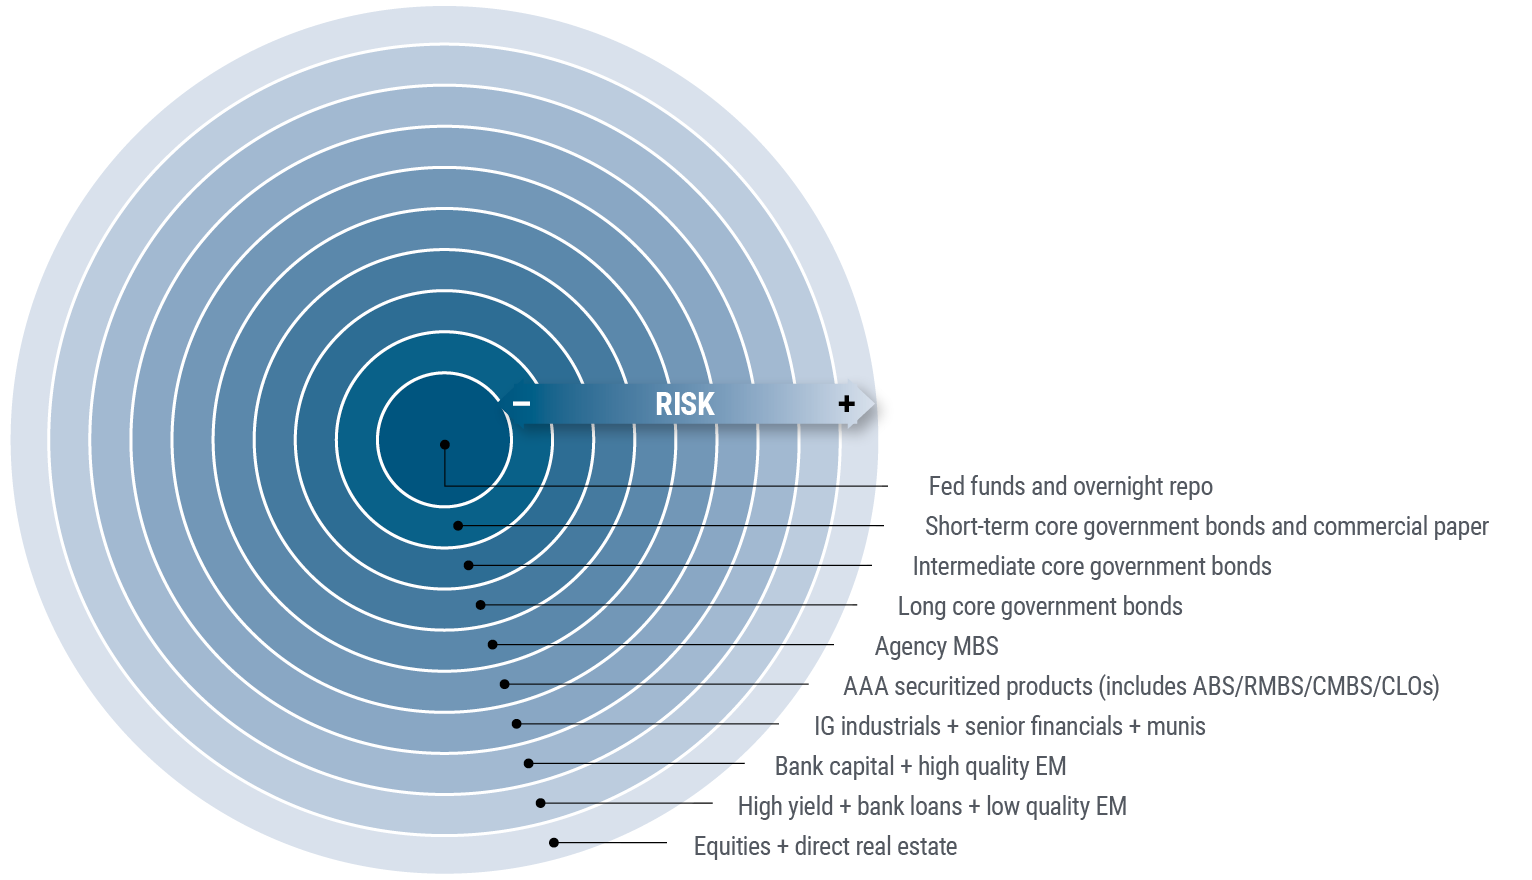 Figure depicts PIMCO’s concept of concentric circles, which places the least risky, most liquid asset classes at the center, including overnight repurchase (repo) rates, commercial paper, and ultra-short and short-term bonds, then expanding to somewhat riskier assets including longer-term sovereign bonds, mortgage-backed securities, and investment grade corporates, and populating the outer rings with less liquid, higher-risk assets, such as high yield corporates, emerging market investments, equities, and real estate.